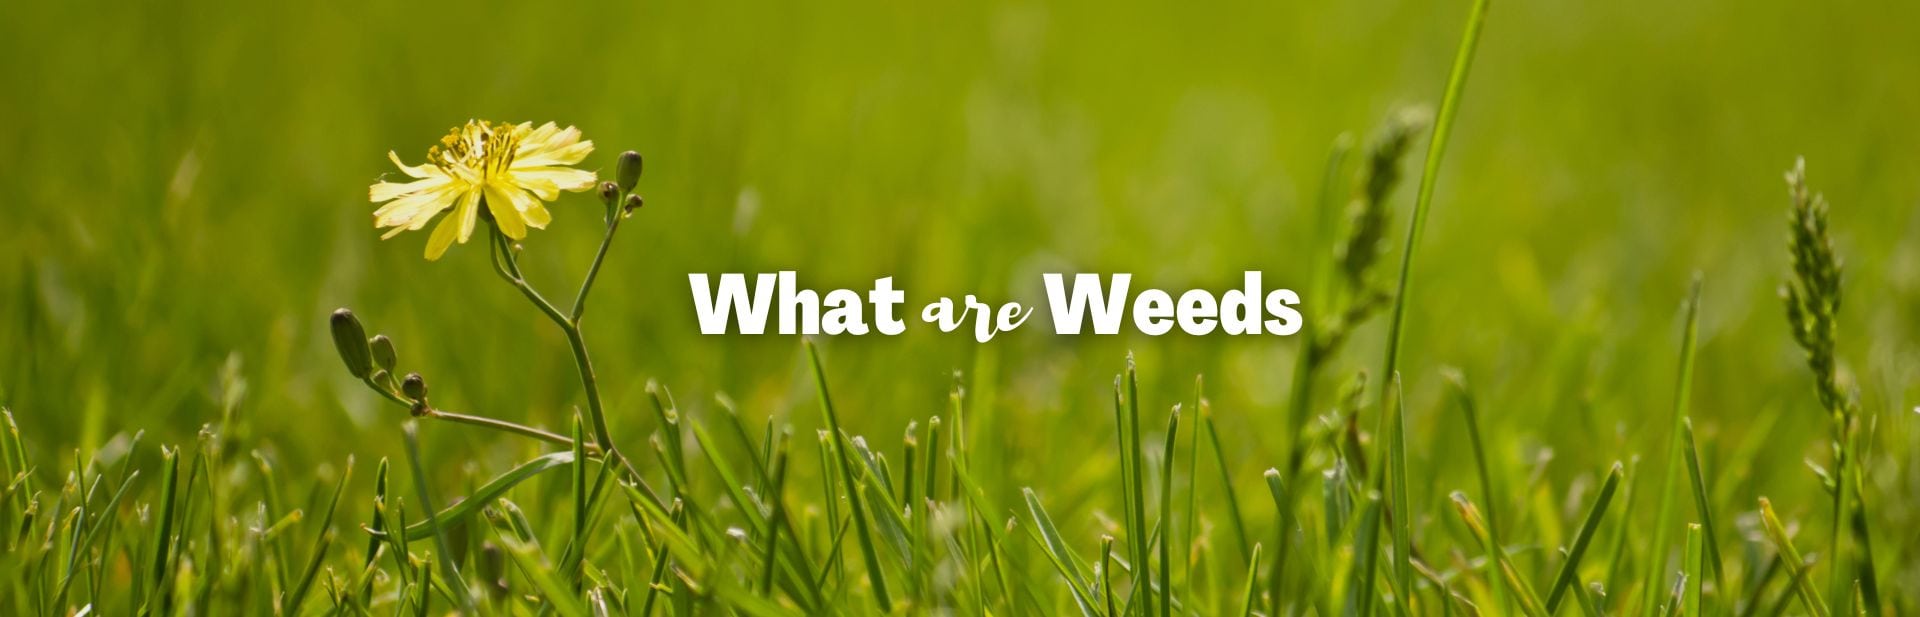 Weeds Revealed: What Are Weeds, and How Do They Benefit Ecosystems?